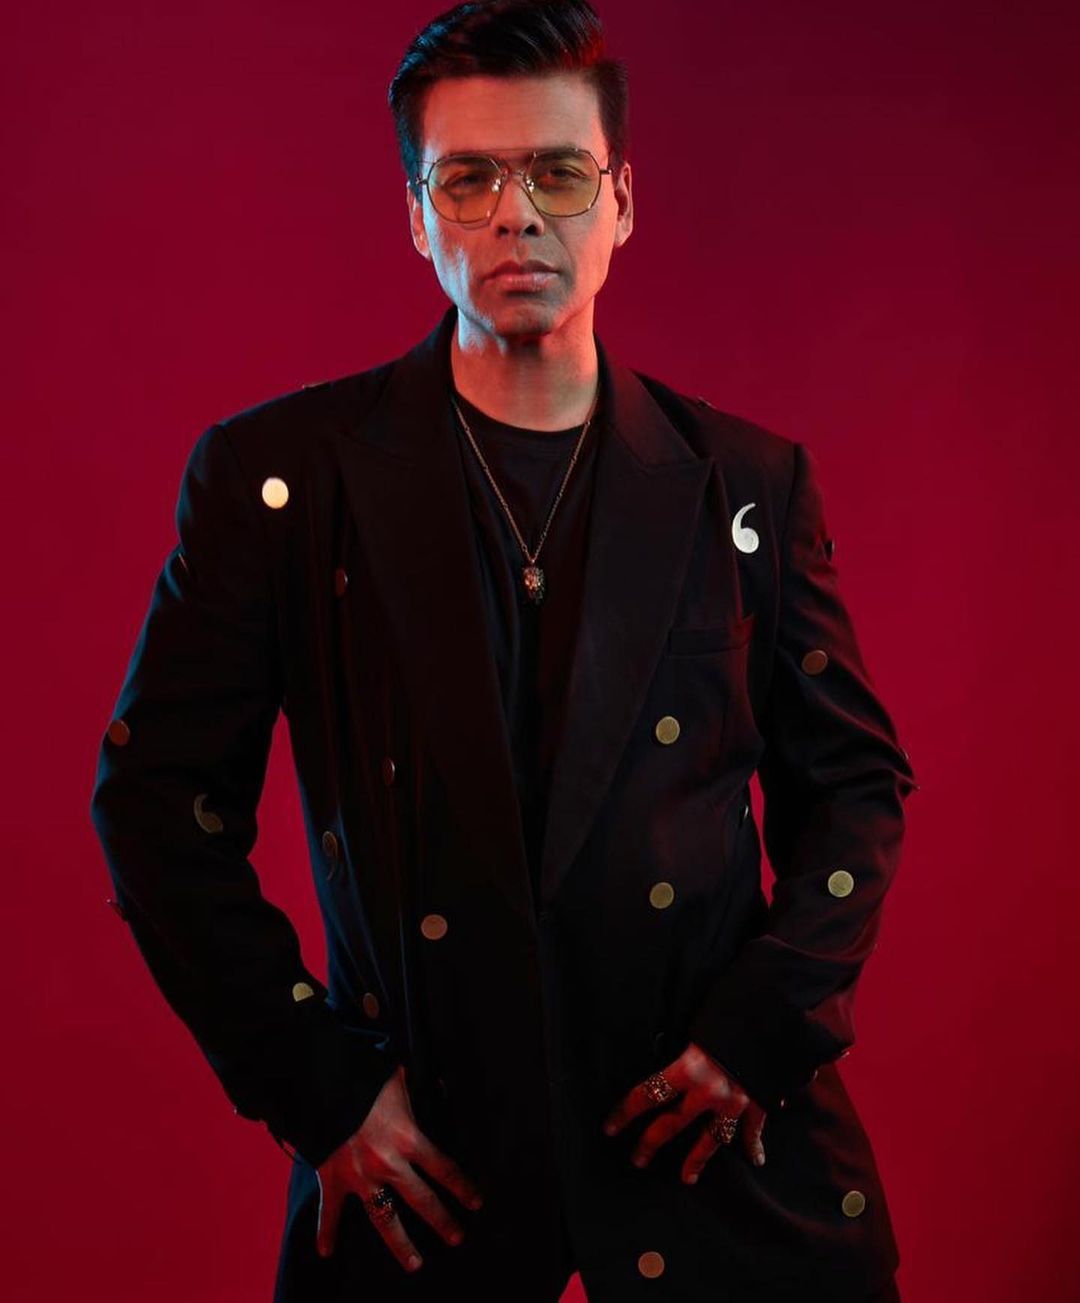 Bigg Boss OTT host Karan Johar explains why FOMO is stopping him from becoming a contestant